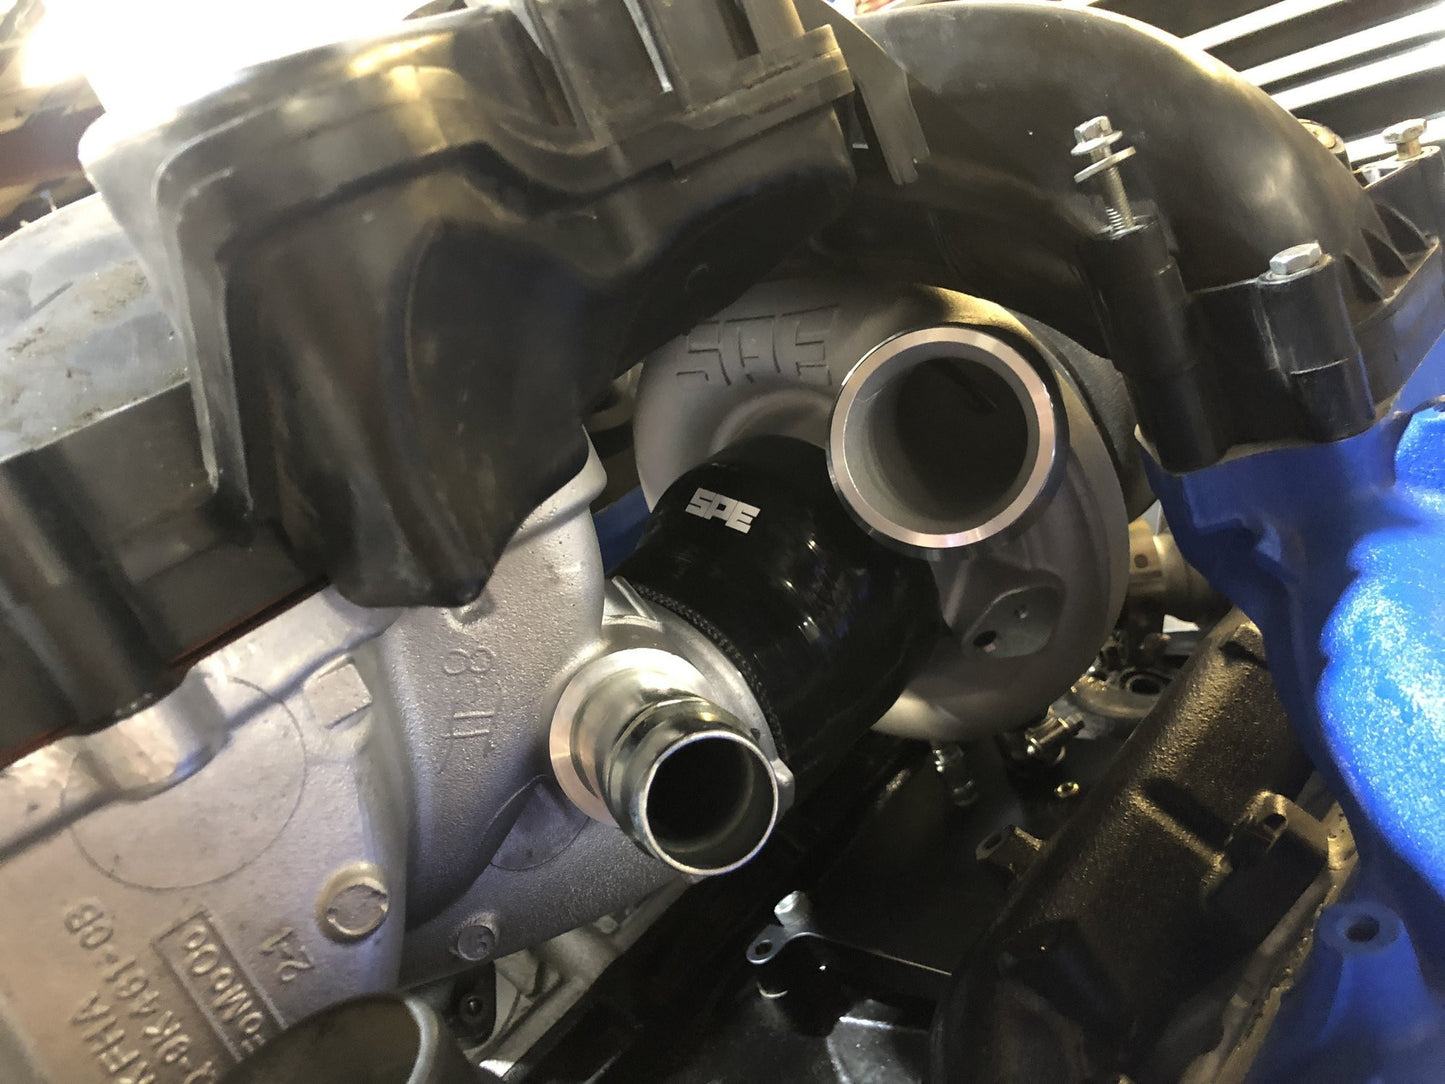 SPE 6.7L EMPEROR TURBO SYSTEM - Turbocharger Kit - Snyder Performance Engineering (SPE) - Texas Complete Truck Center